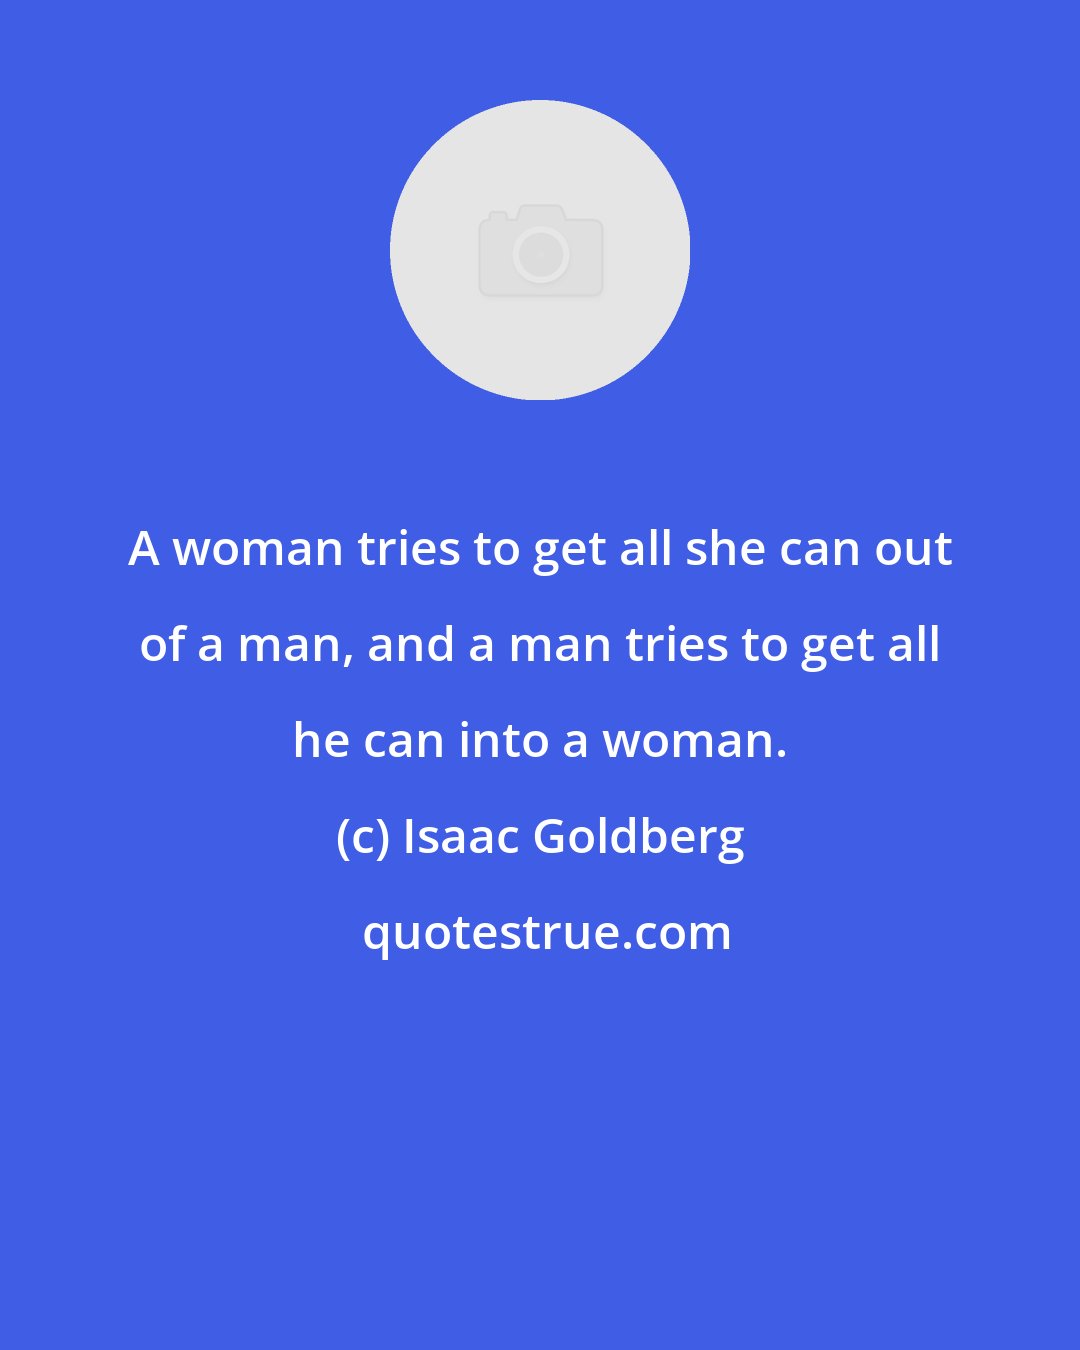 Isaac Goldberg: A woman tries to get all she can out of a man, and a man tries to get all he can into a woman.